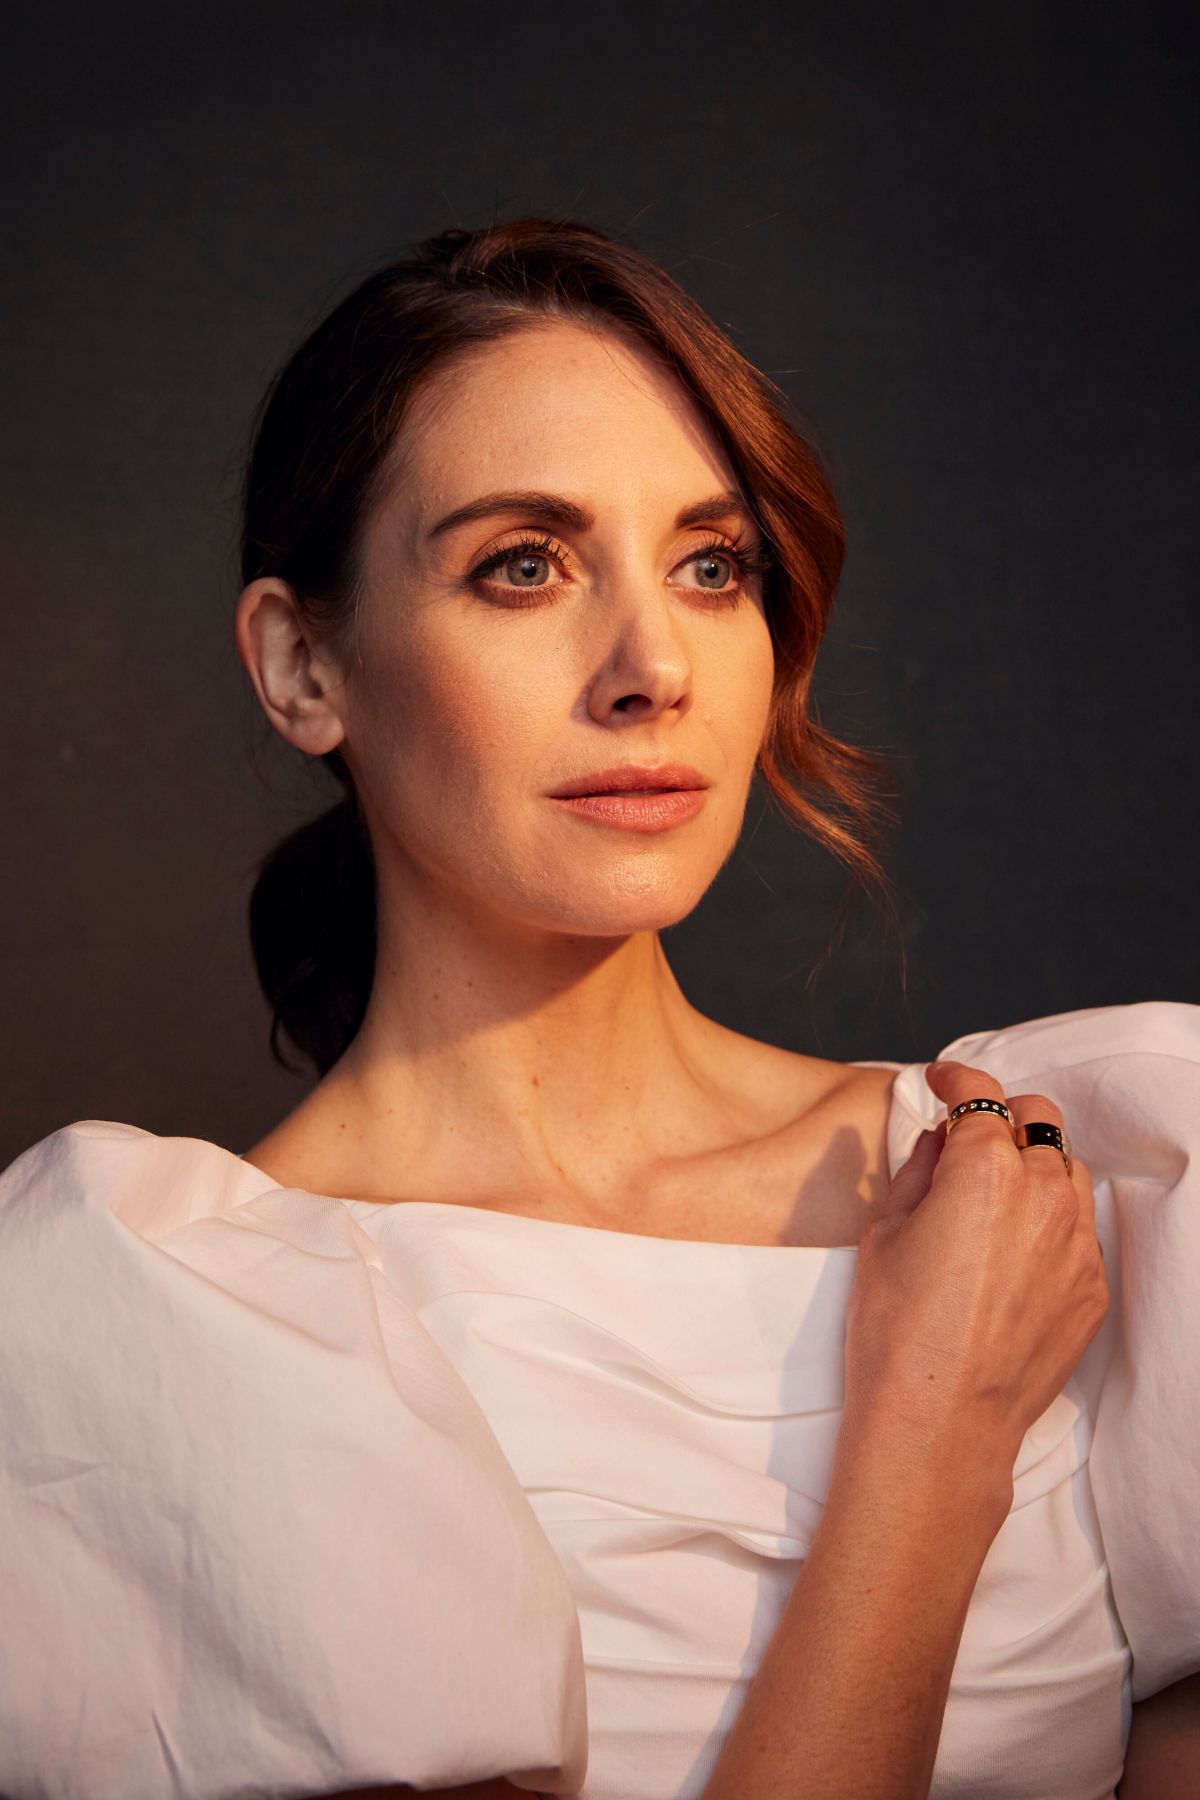 ALISON BRIE at a Photoshoot, January 2020 – HawtCelebs